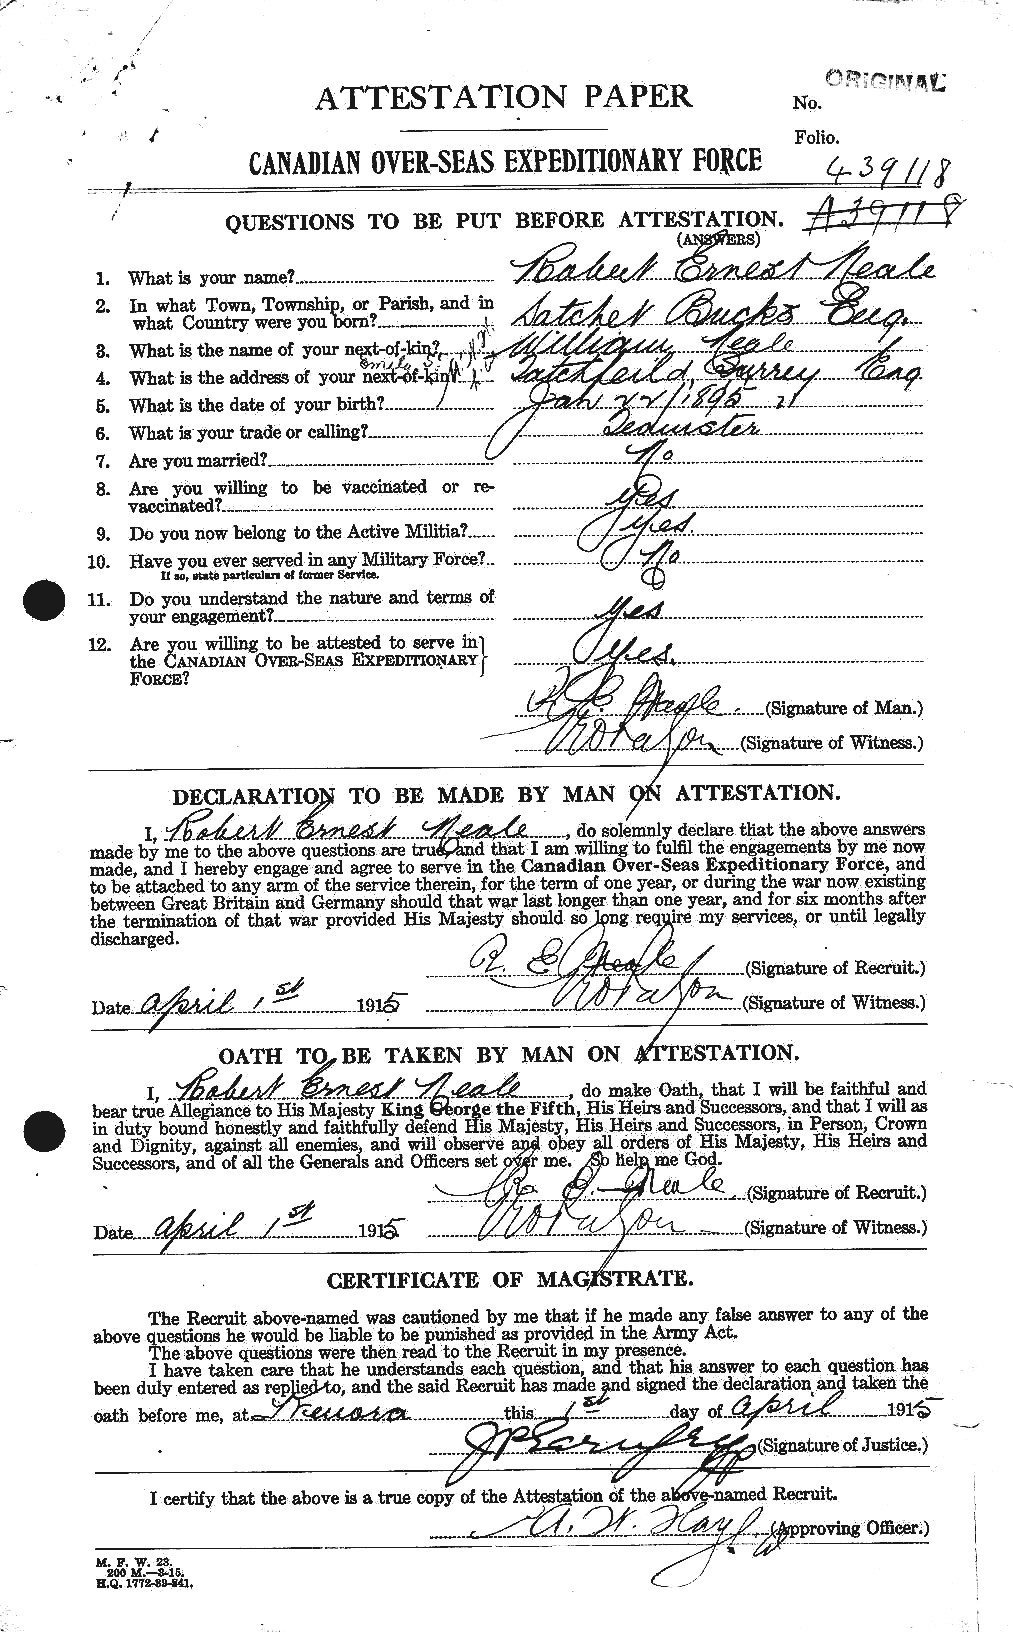 Personnel Records of the First World War - CEF 543609a